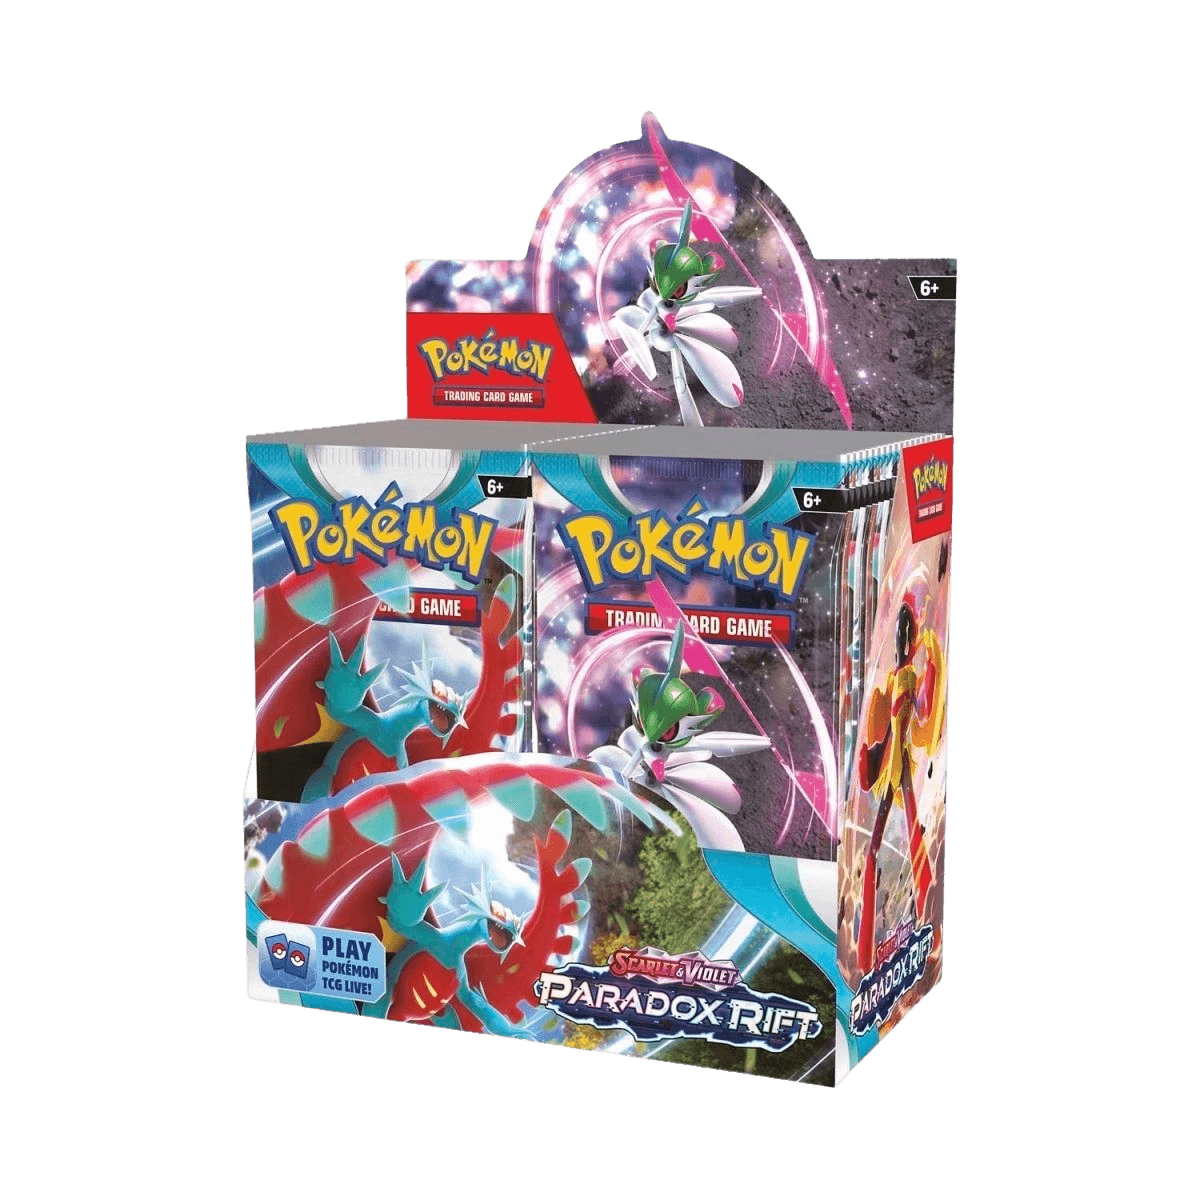 Pokemon TCG - Scarlet & Violet - Paradox Rift - Display Case (6x Booster Boxes) - The Card Vault